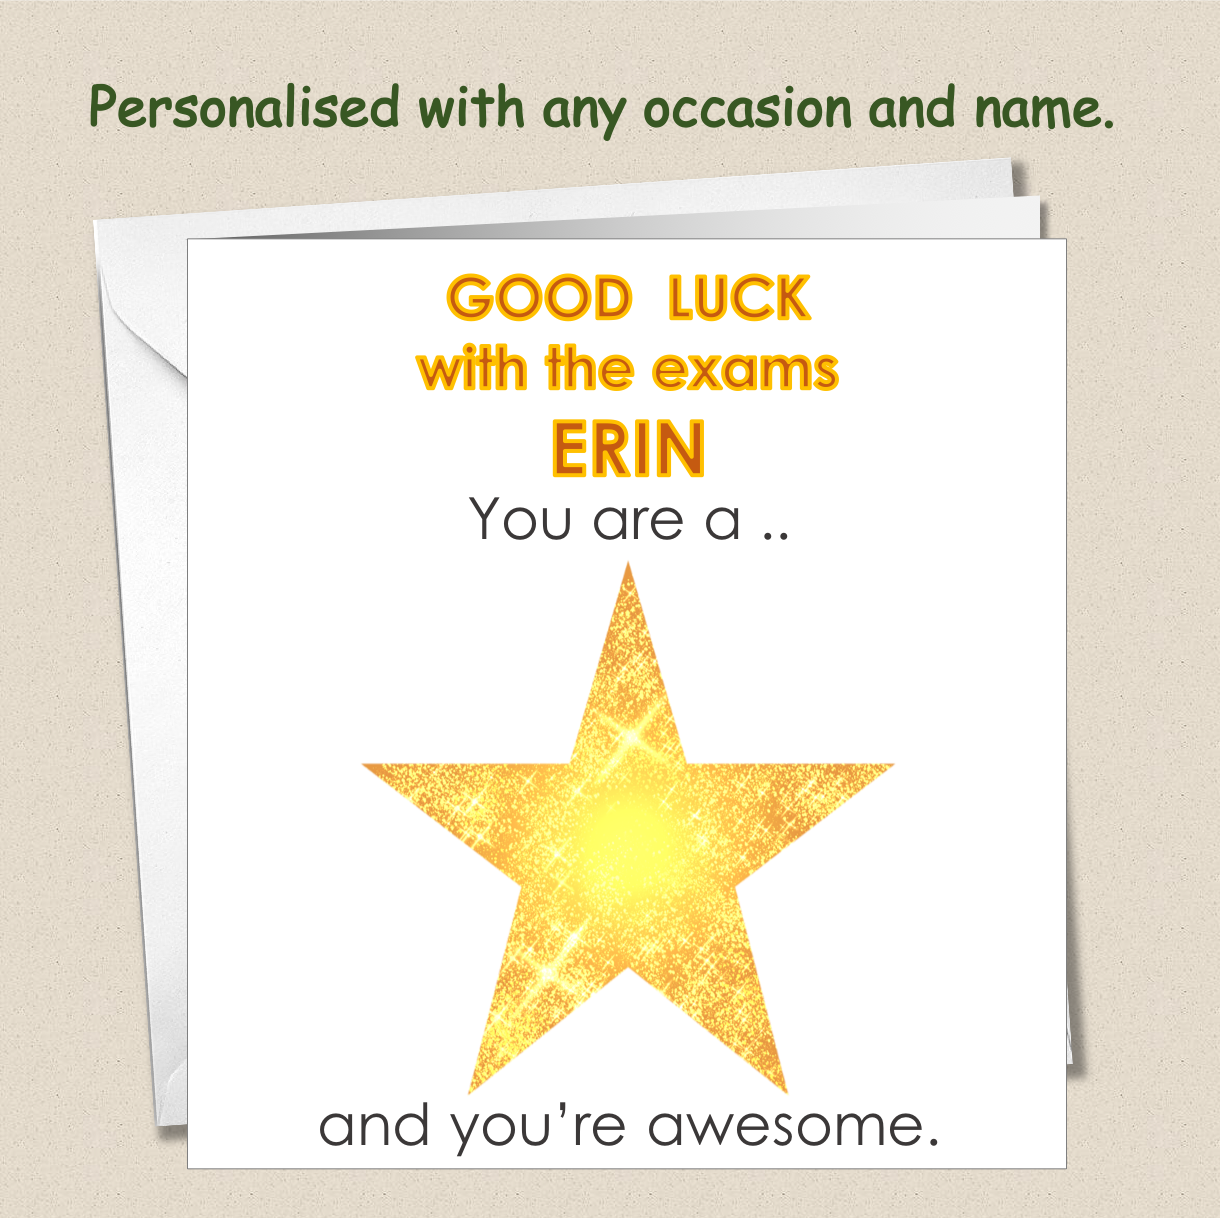 Personalised Good Luck card - You Are A Star